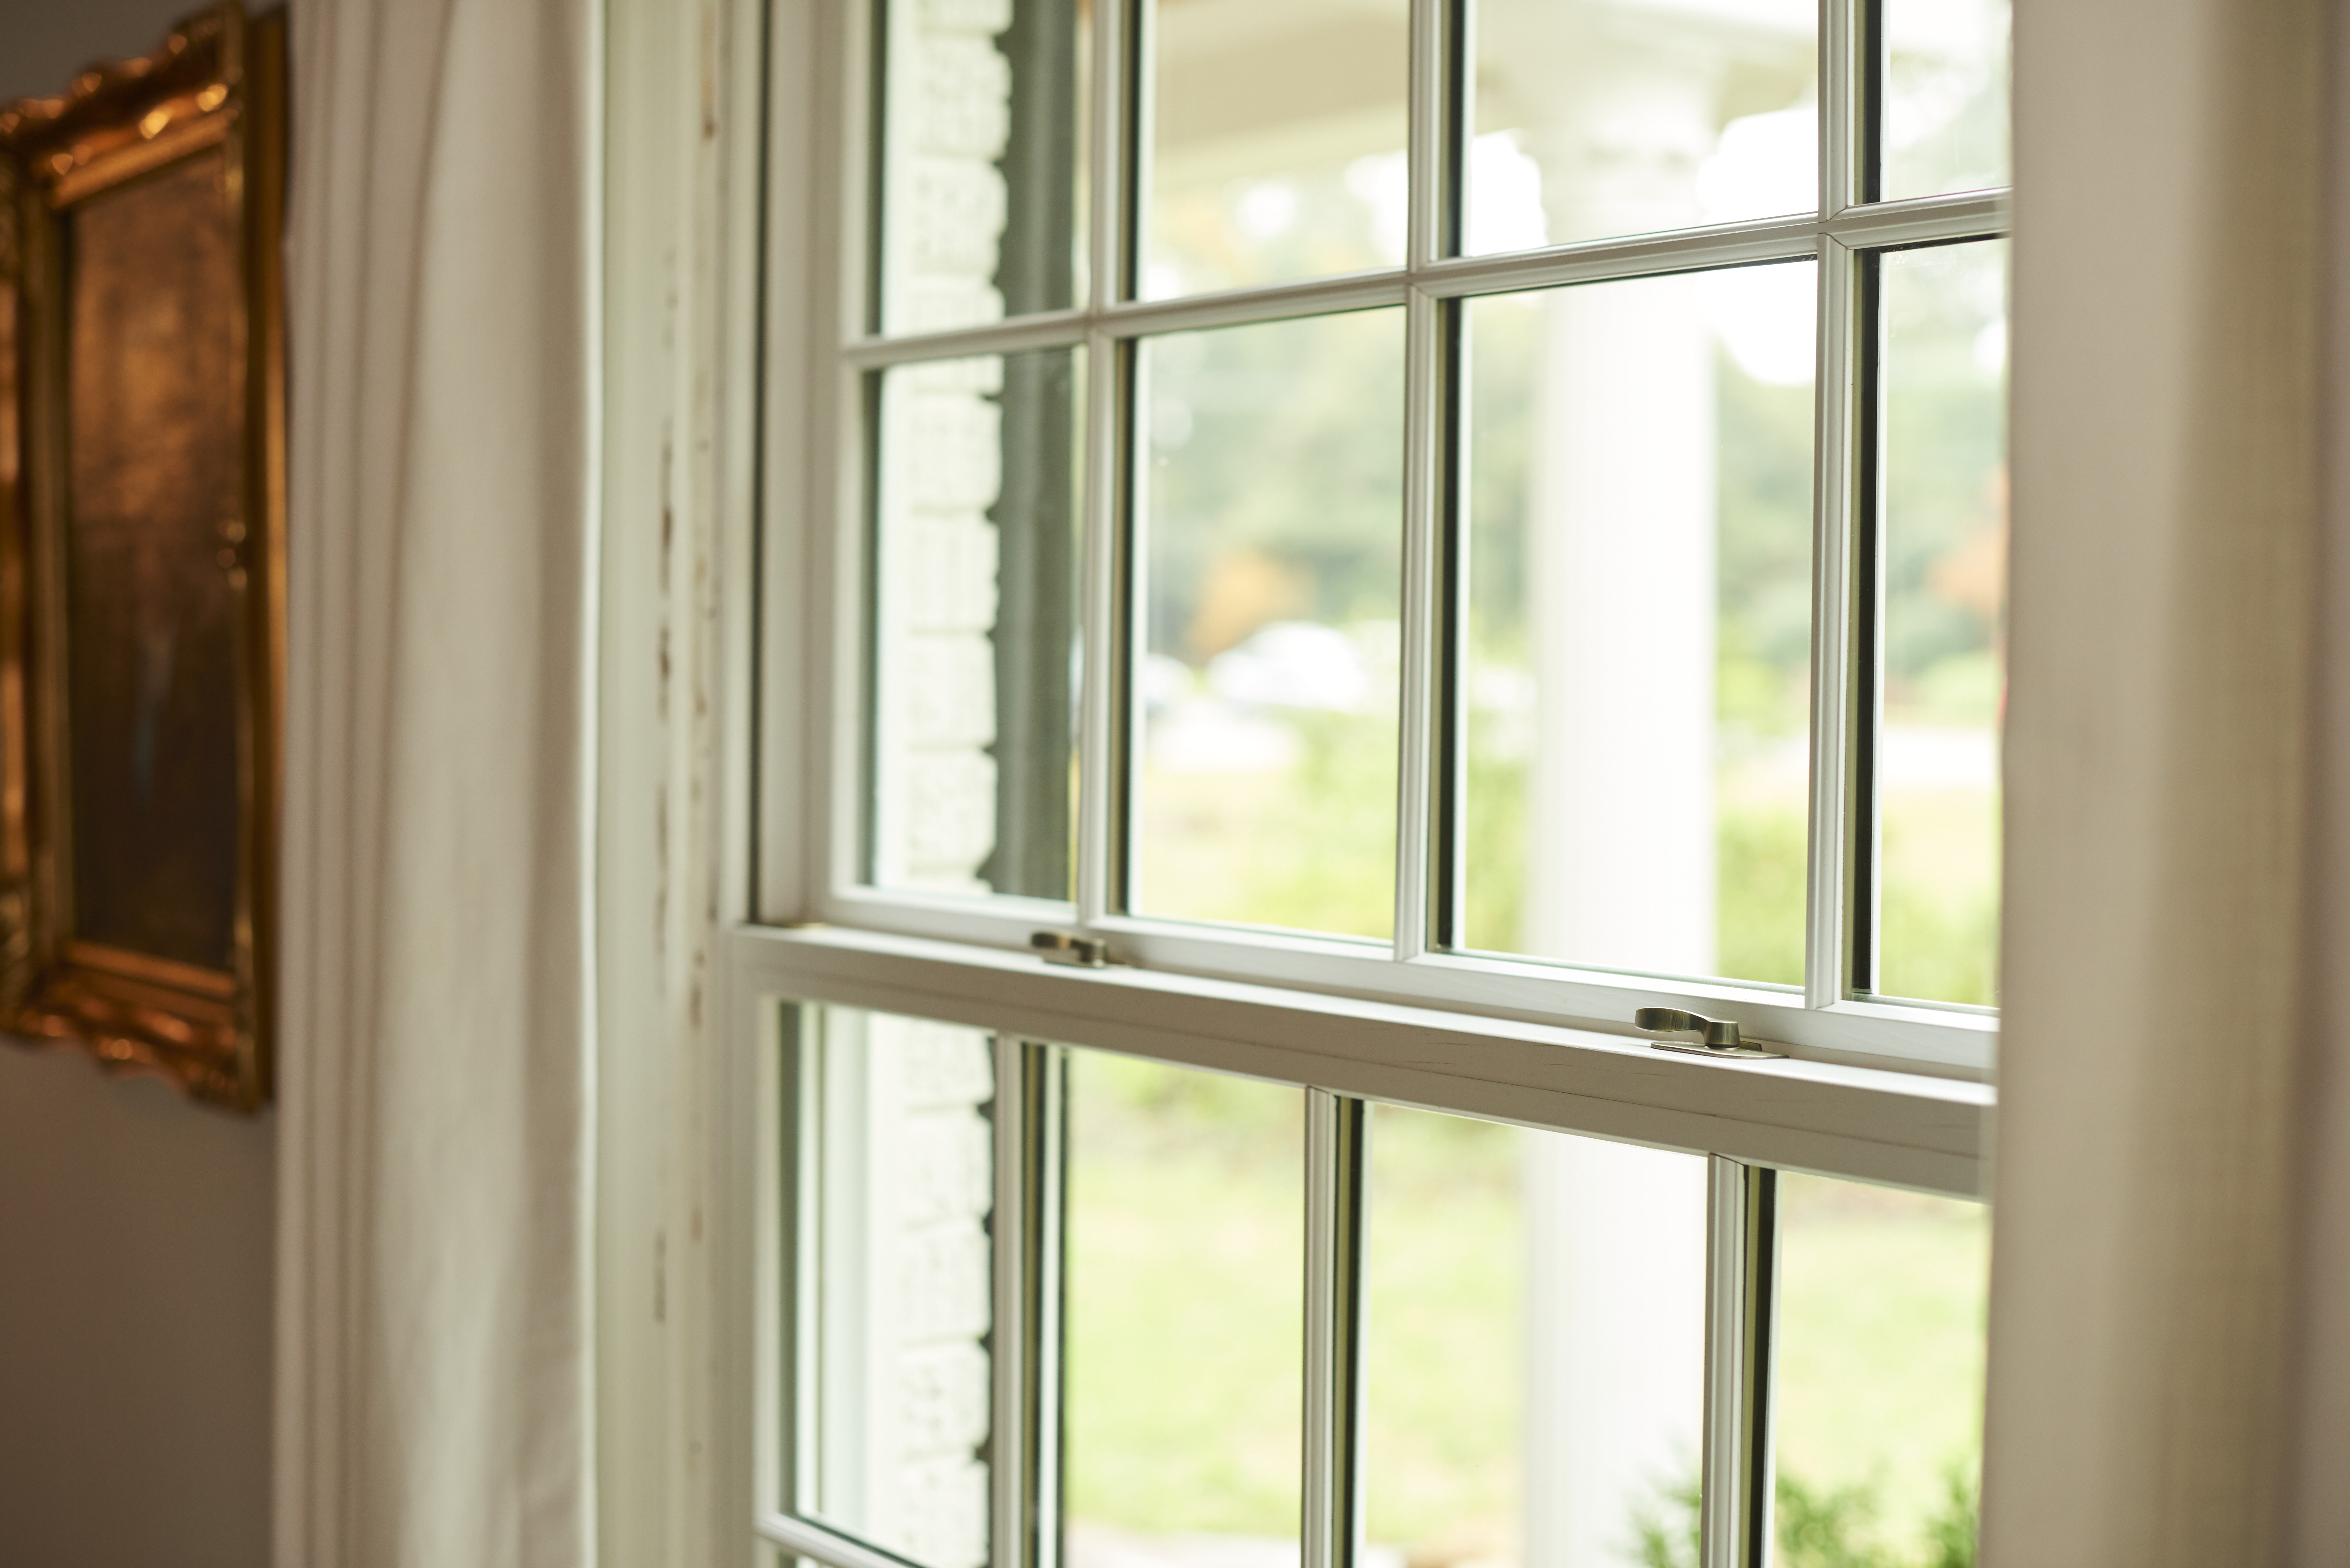 Upgrade Windows Without Replacing the Frames With Jeld-Wen's Siteline Pocket and Sash Pack